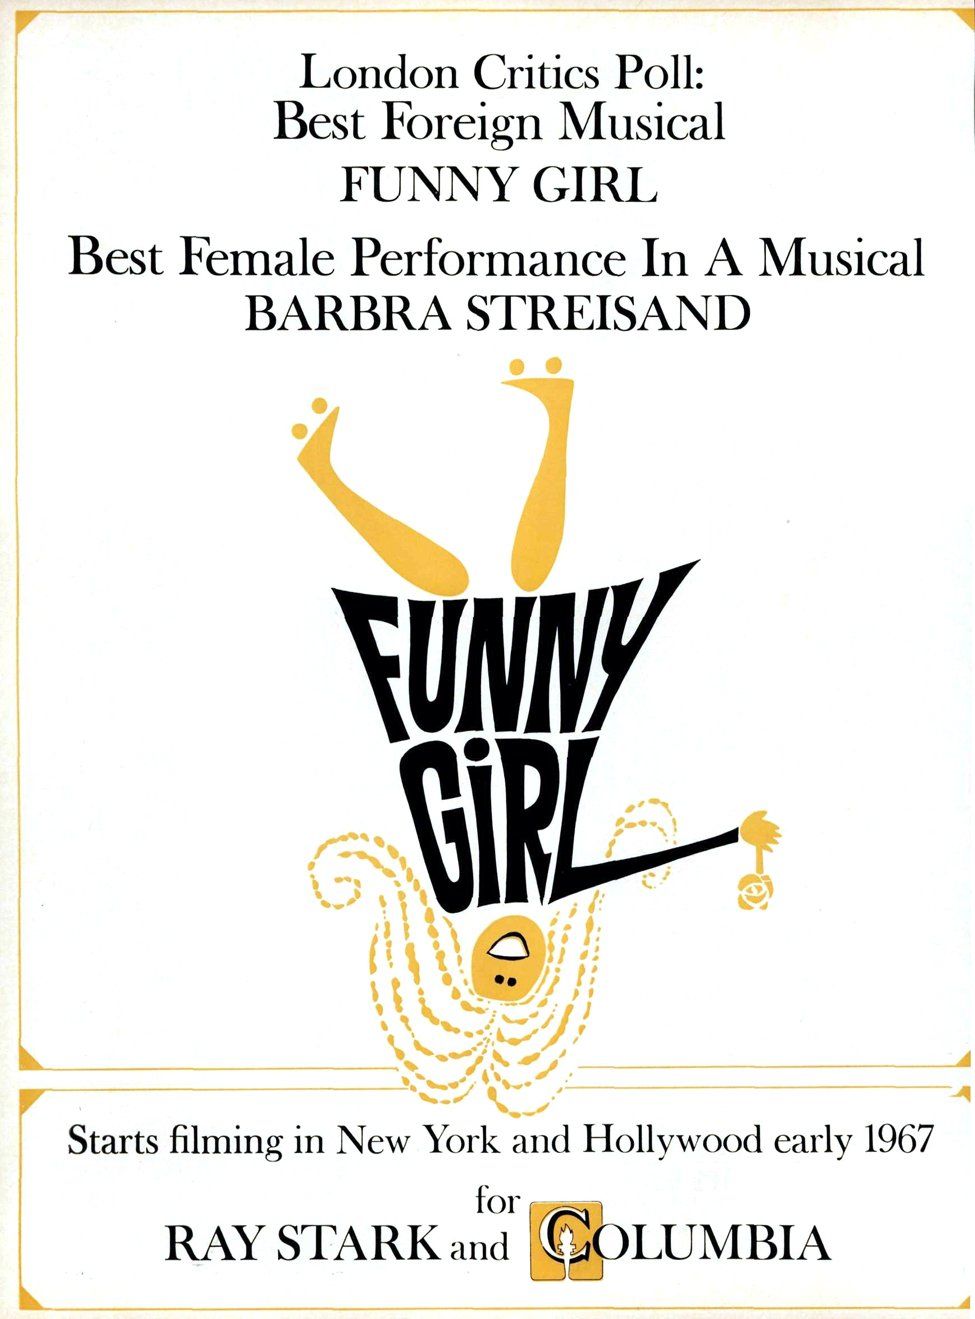 Industry trade ad saying Funny Girl will begin filming early 1967